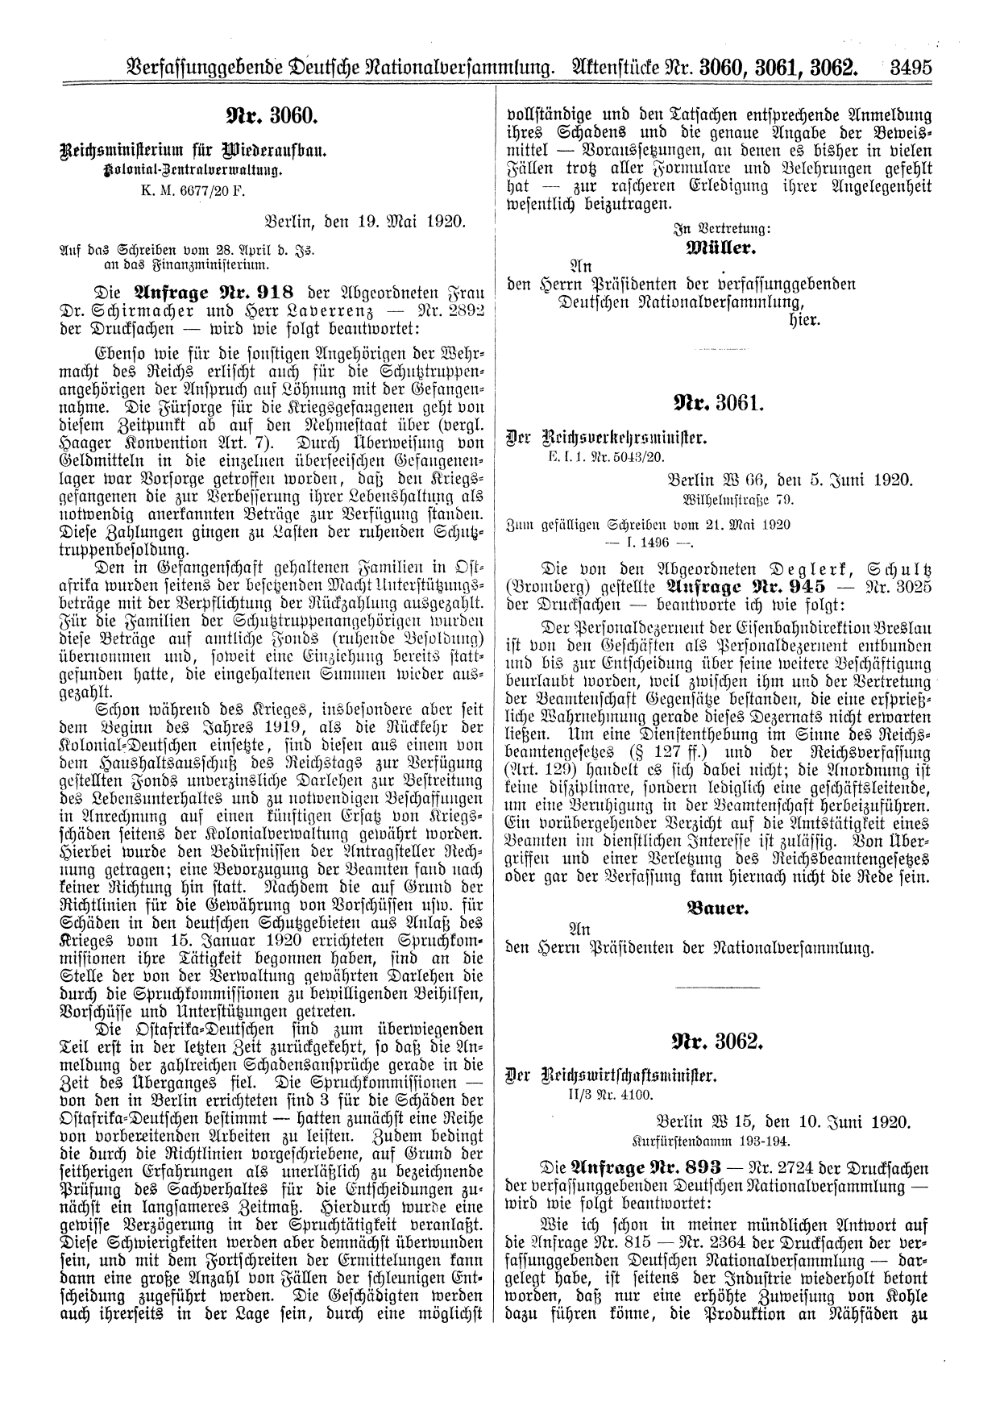 Scan of page 3495